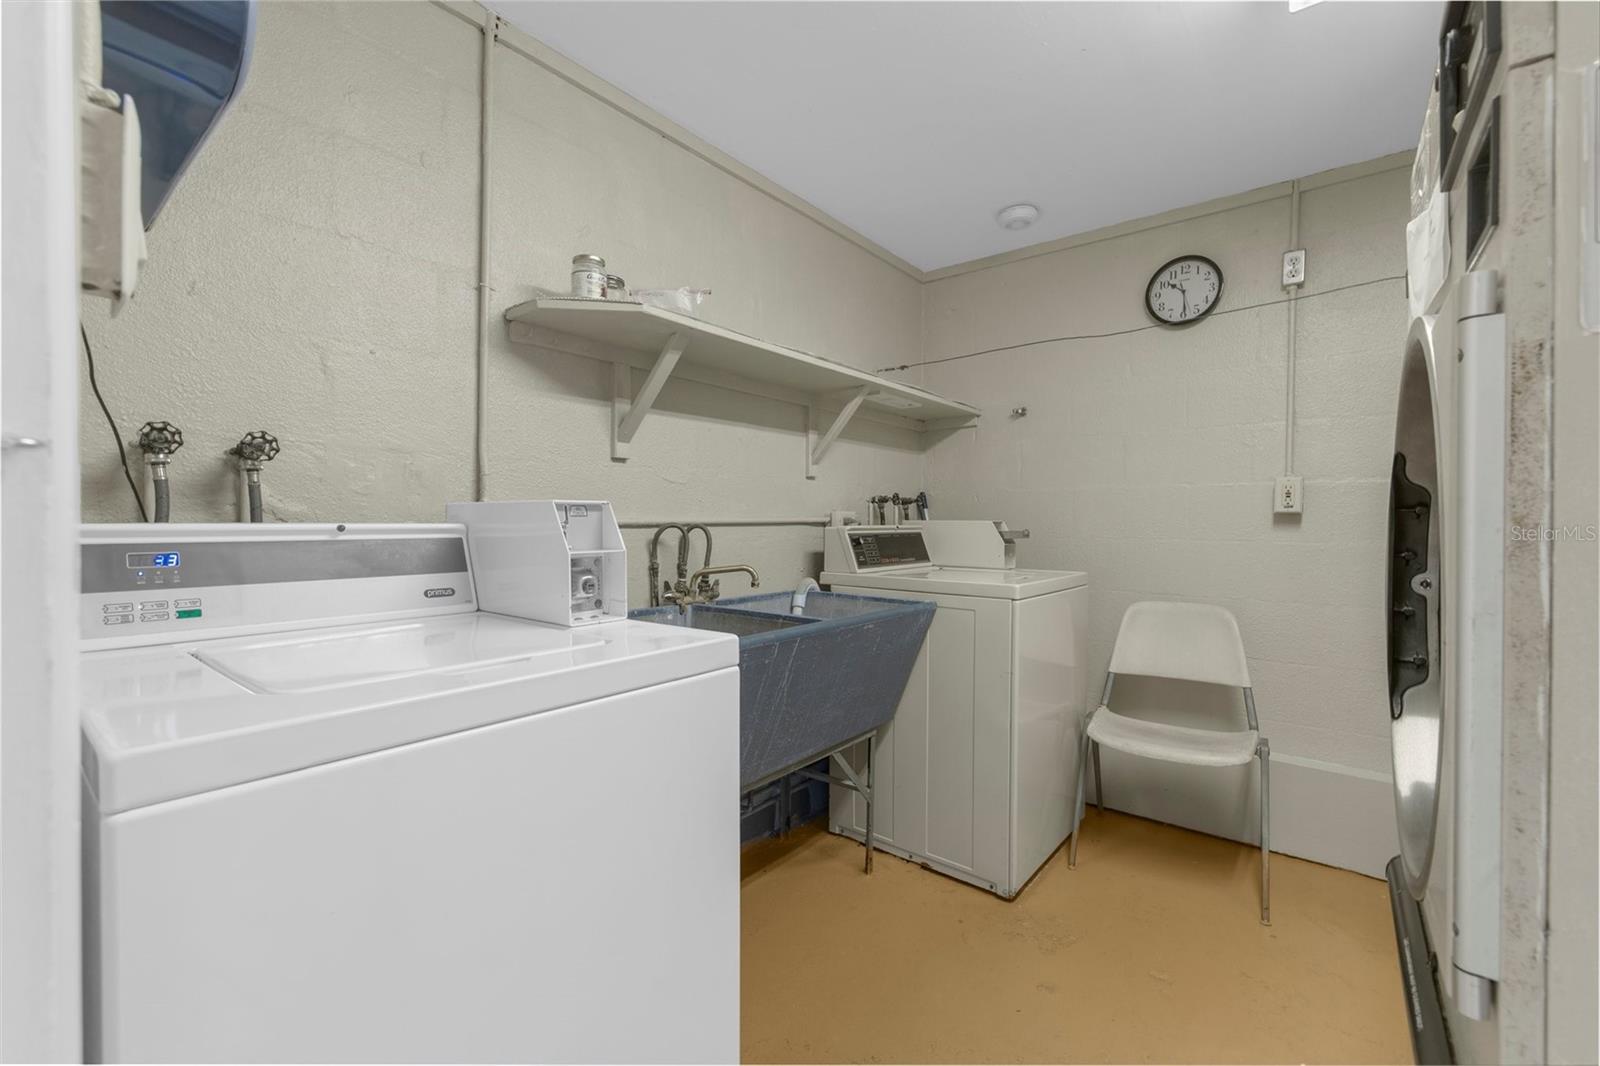 Laundry is downstairs close to the unit.